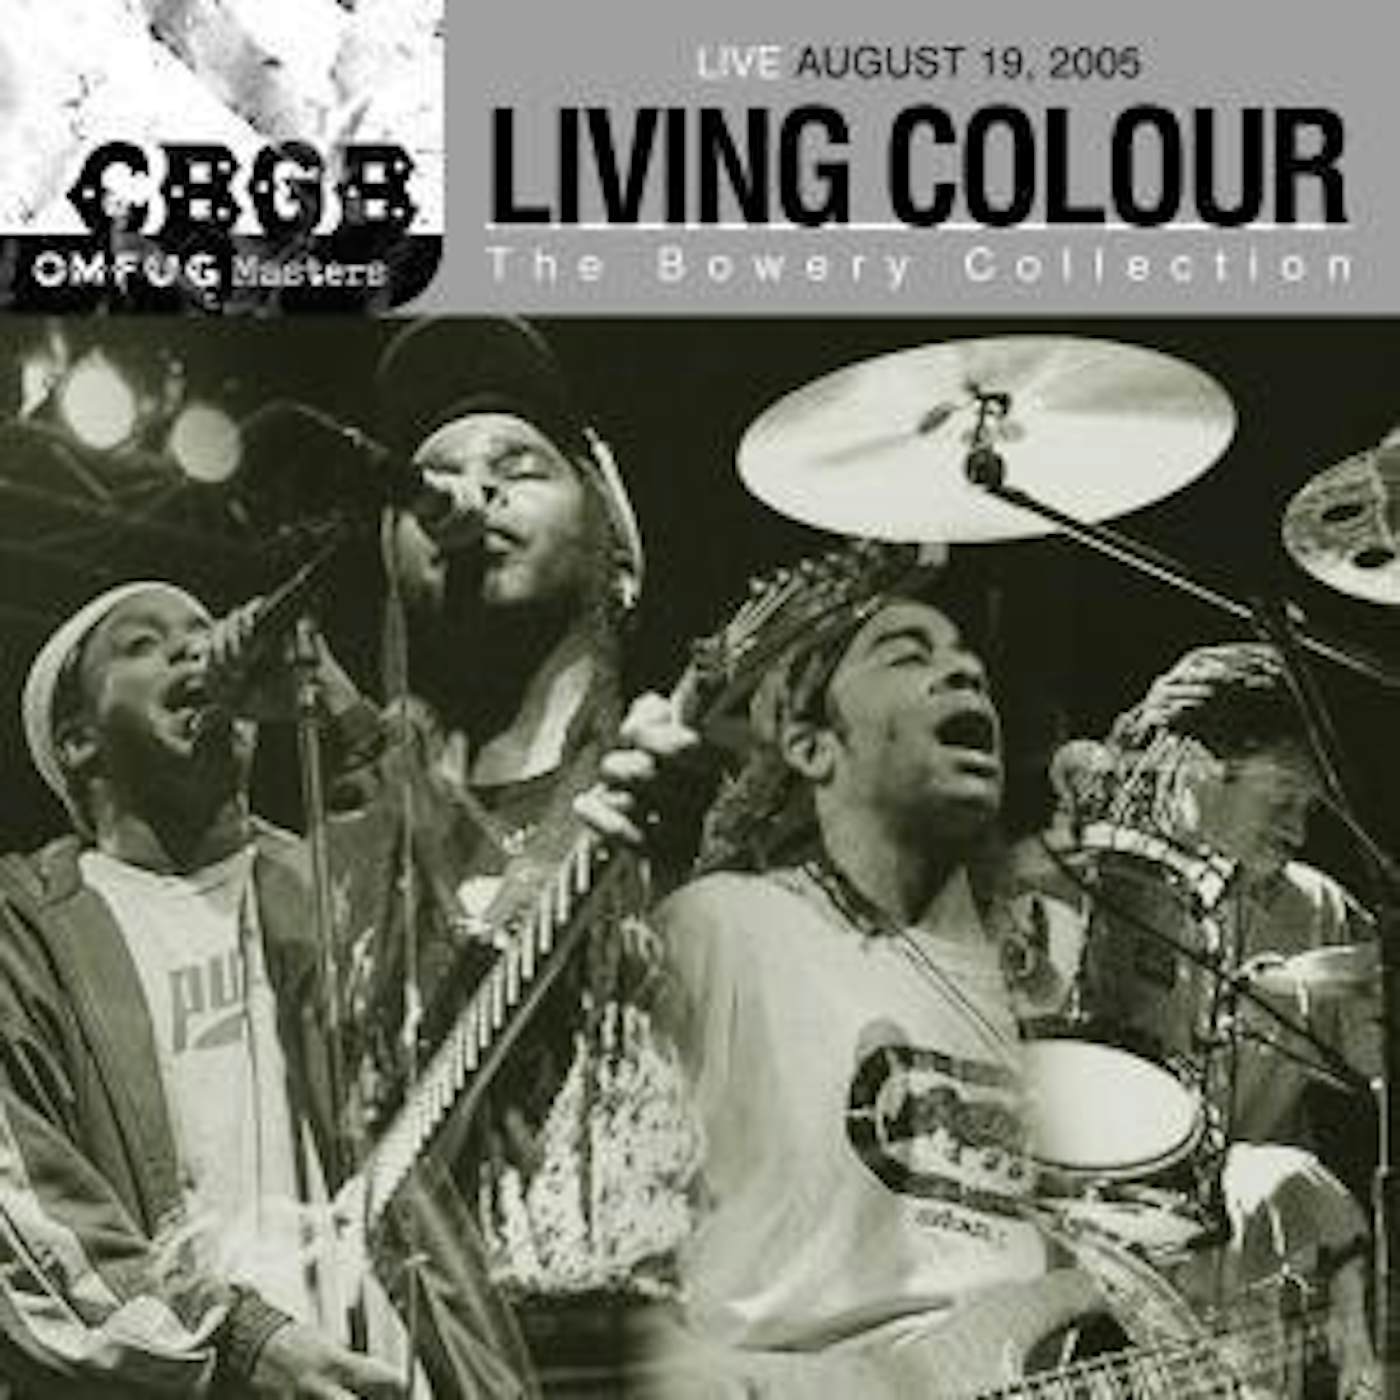 Living Colour CBGB OMFUG MASTERS: AUGUST 19, 2005 THE BOWERY COLLECTION CD